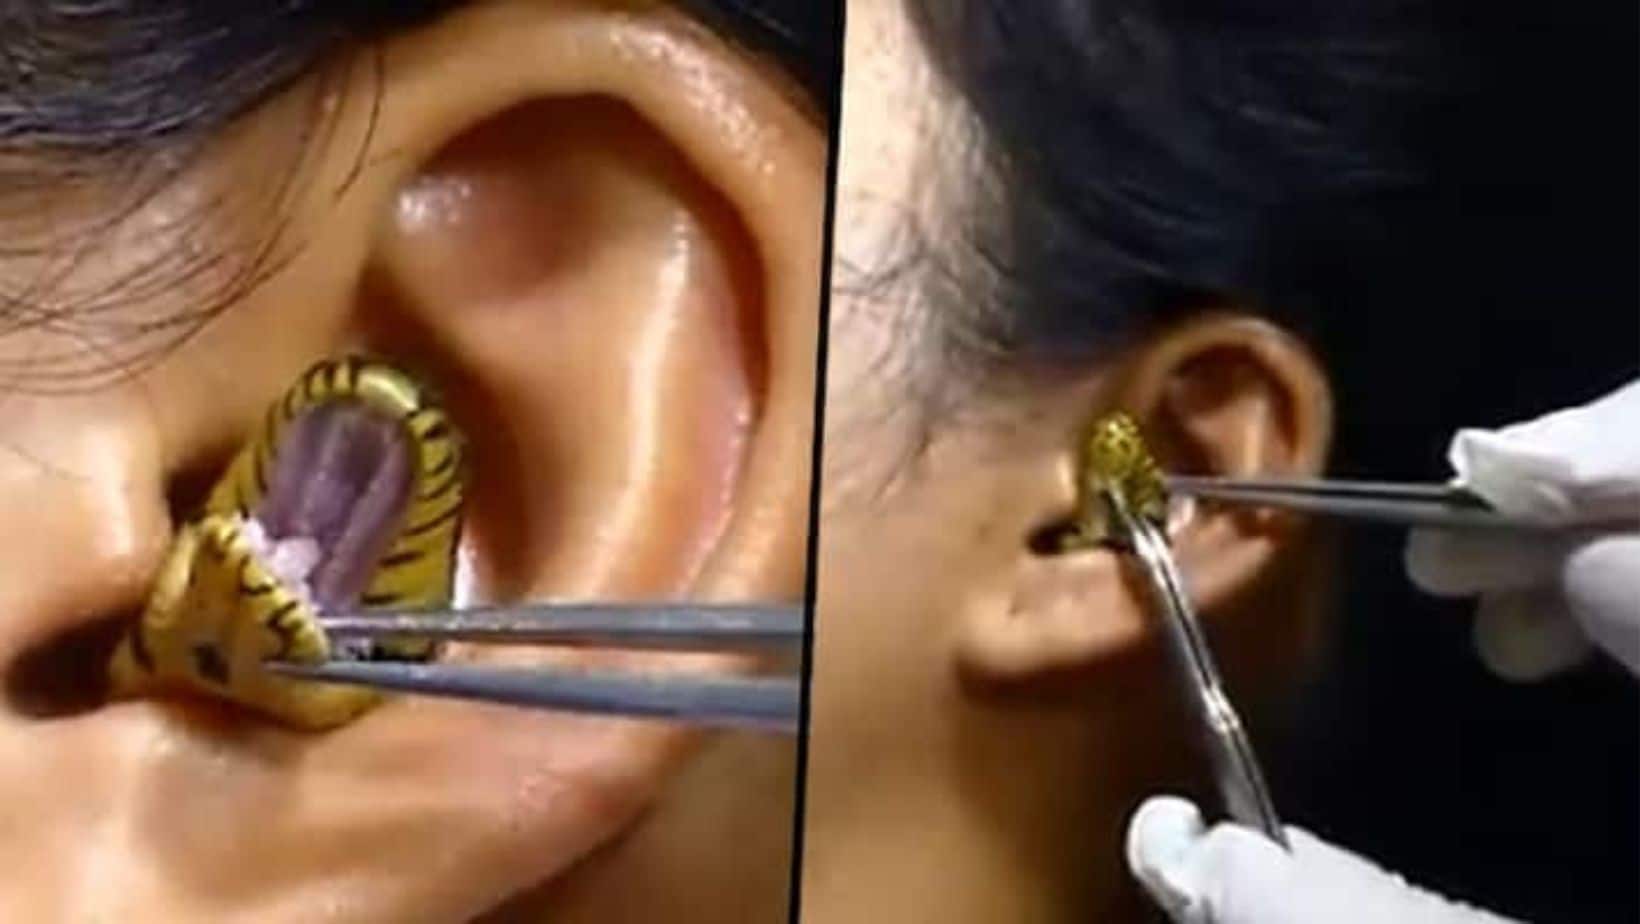 How To Treat Infected Ear Piercings From Dermatologist